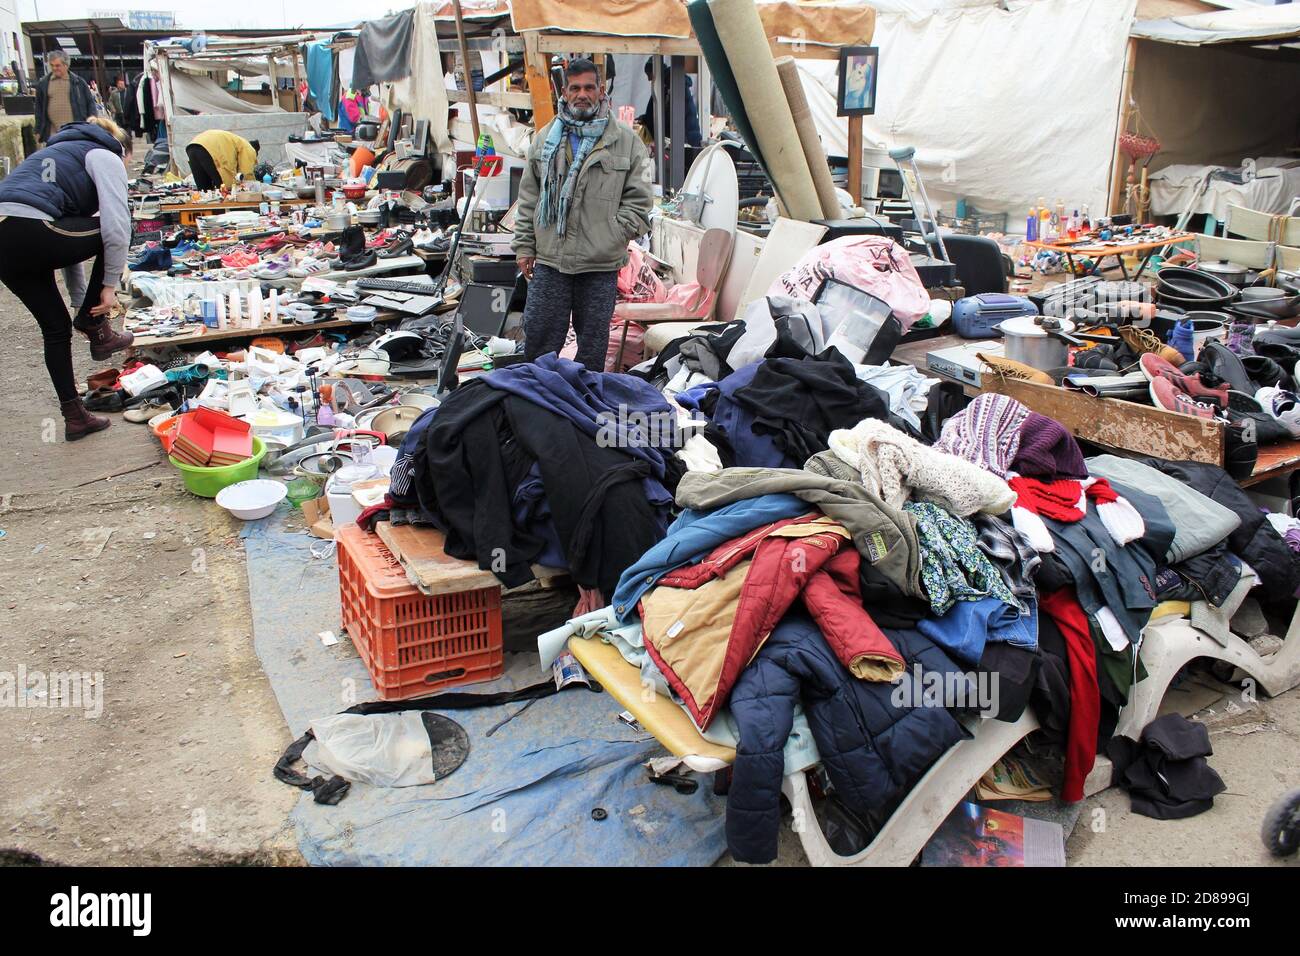 Second hand items for sale at street market in Athens, Greece, January 5 2020. Stock Photo